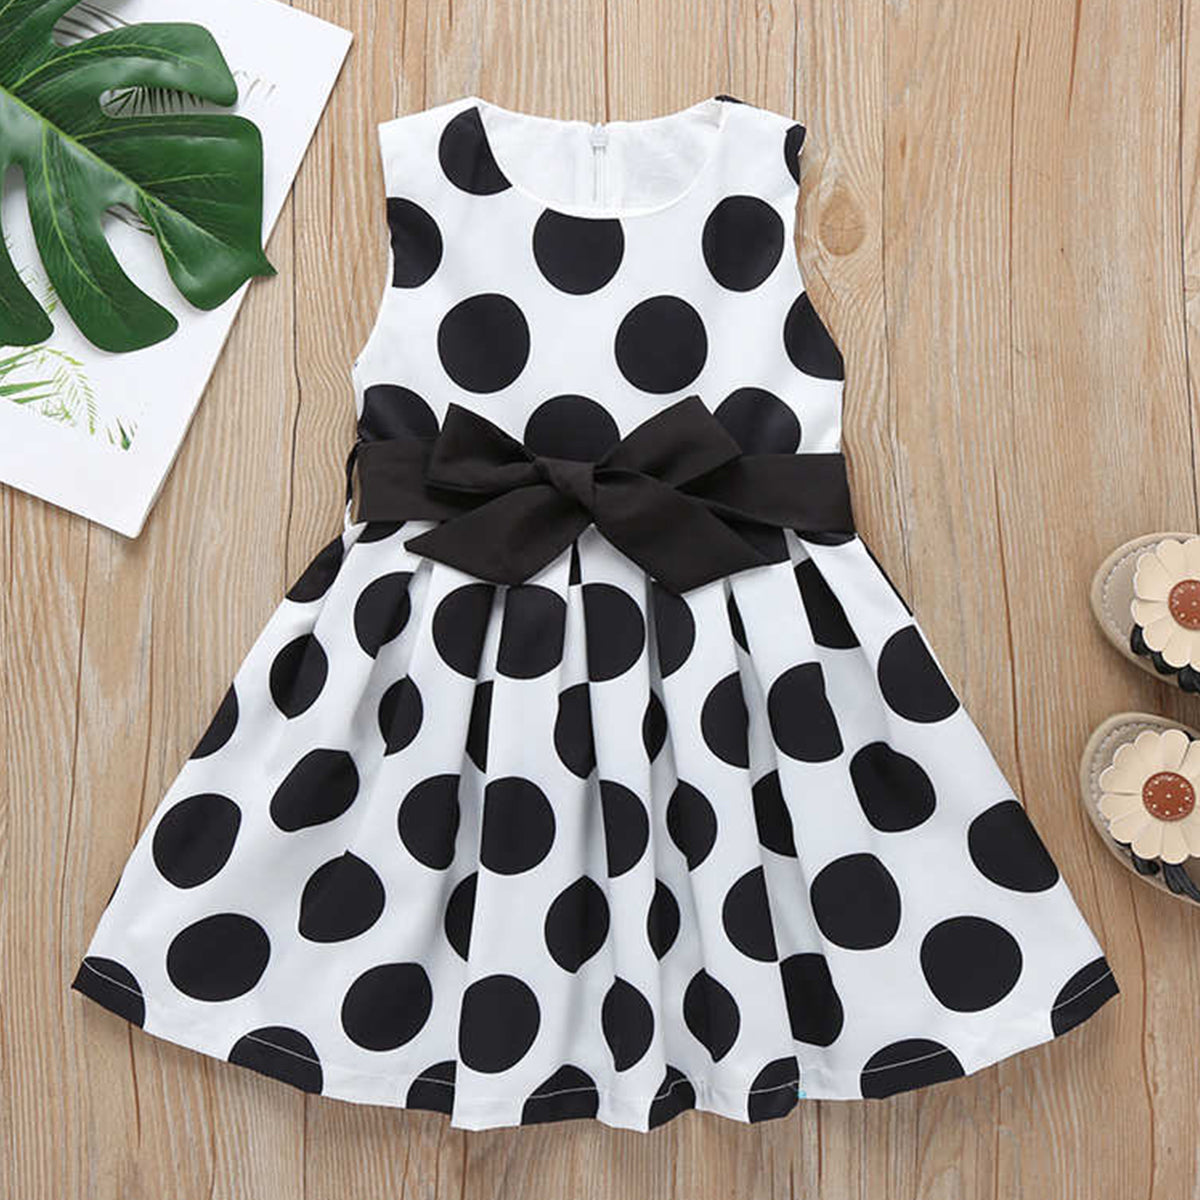 BabyGirl Princess New Fashion Black Dot & Multicolor Lining Cami Dresses Combo Packfor Baby Girls.